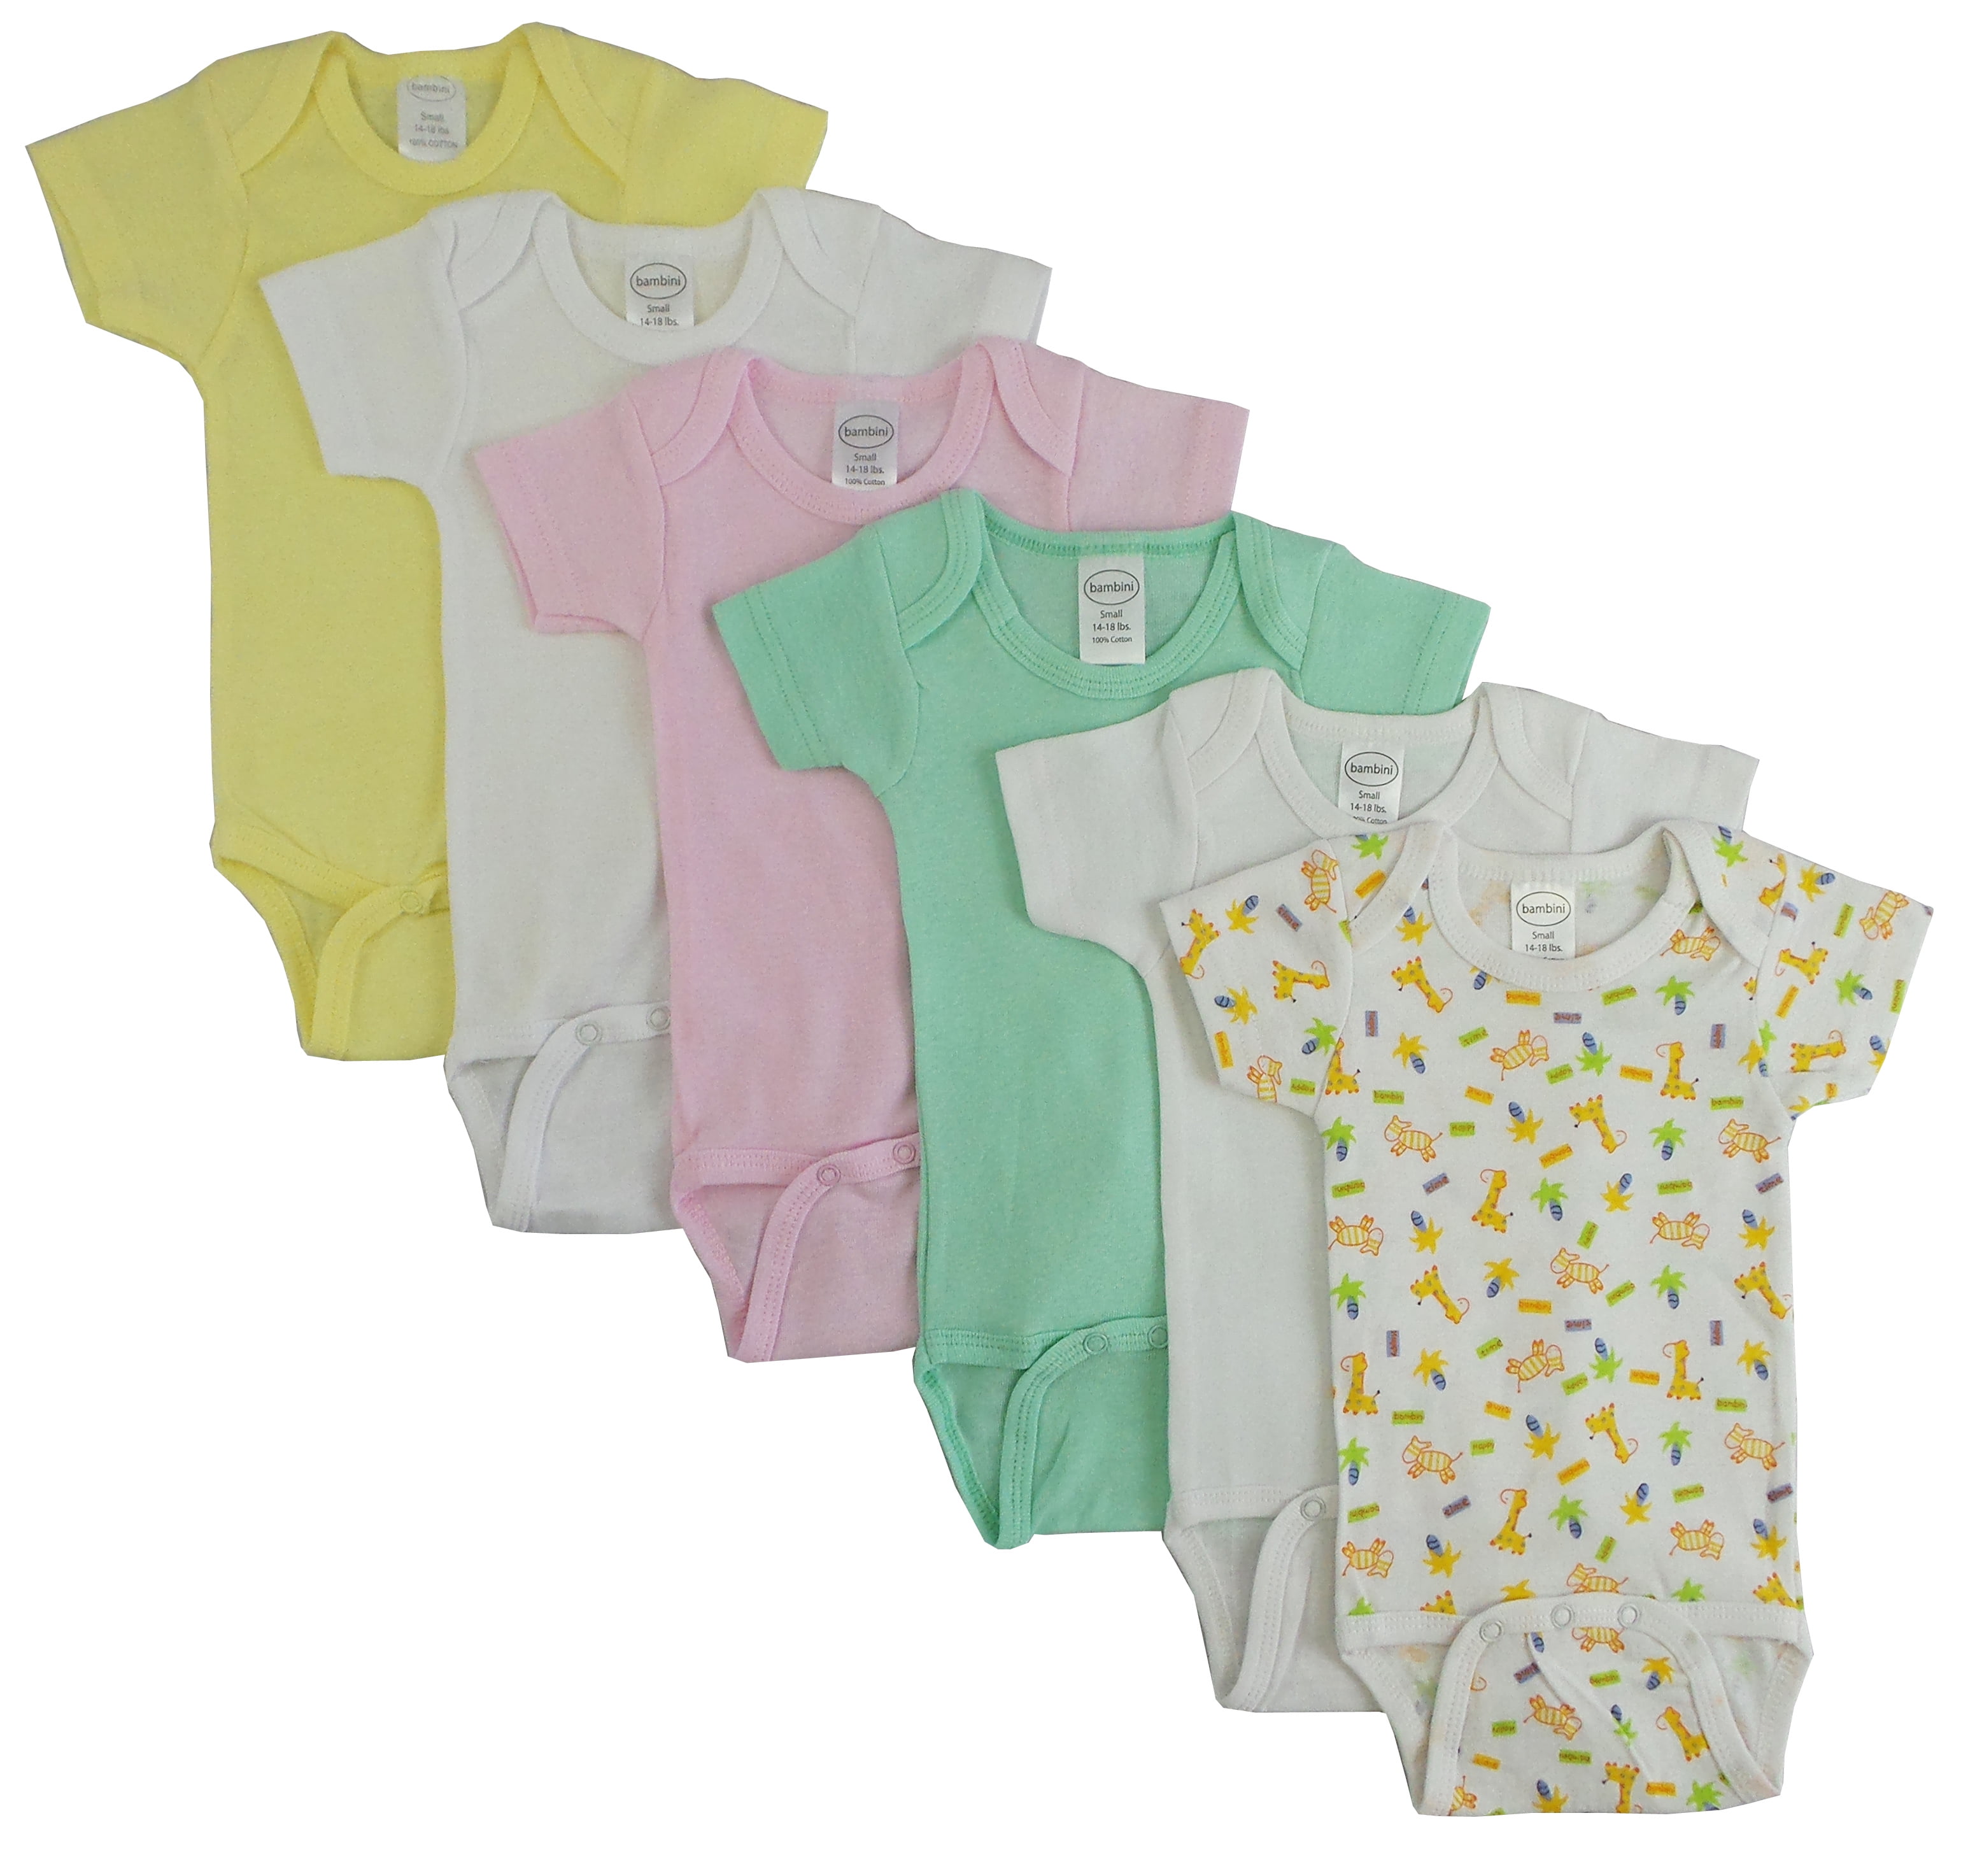 Cs-003l-004l Pastel Girls Short Sleeve With Printed, Assorted - Large